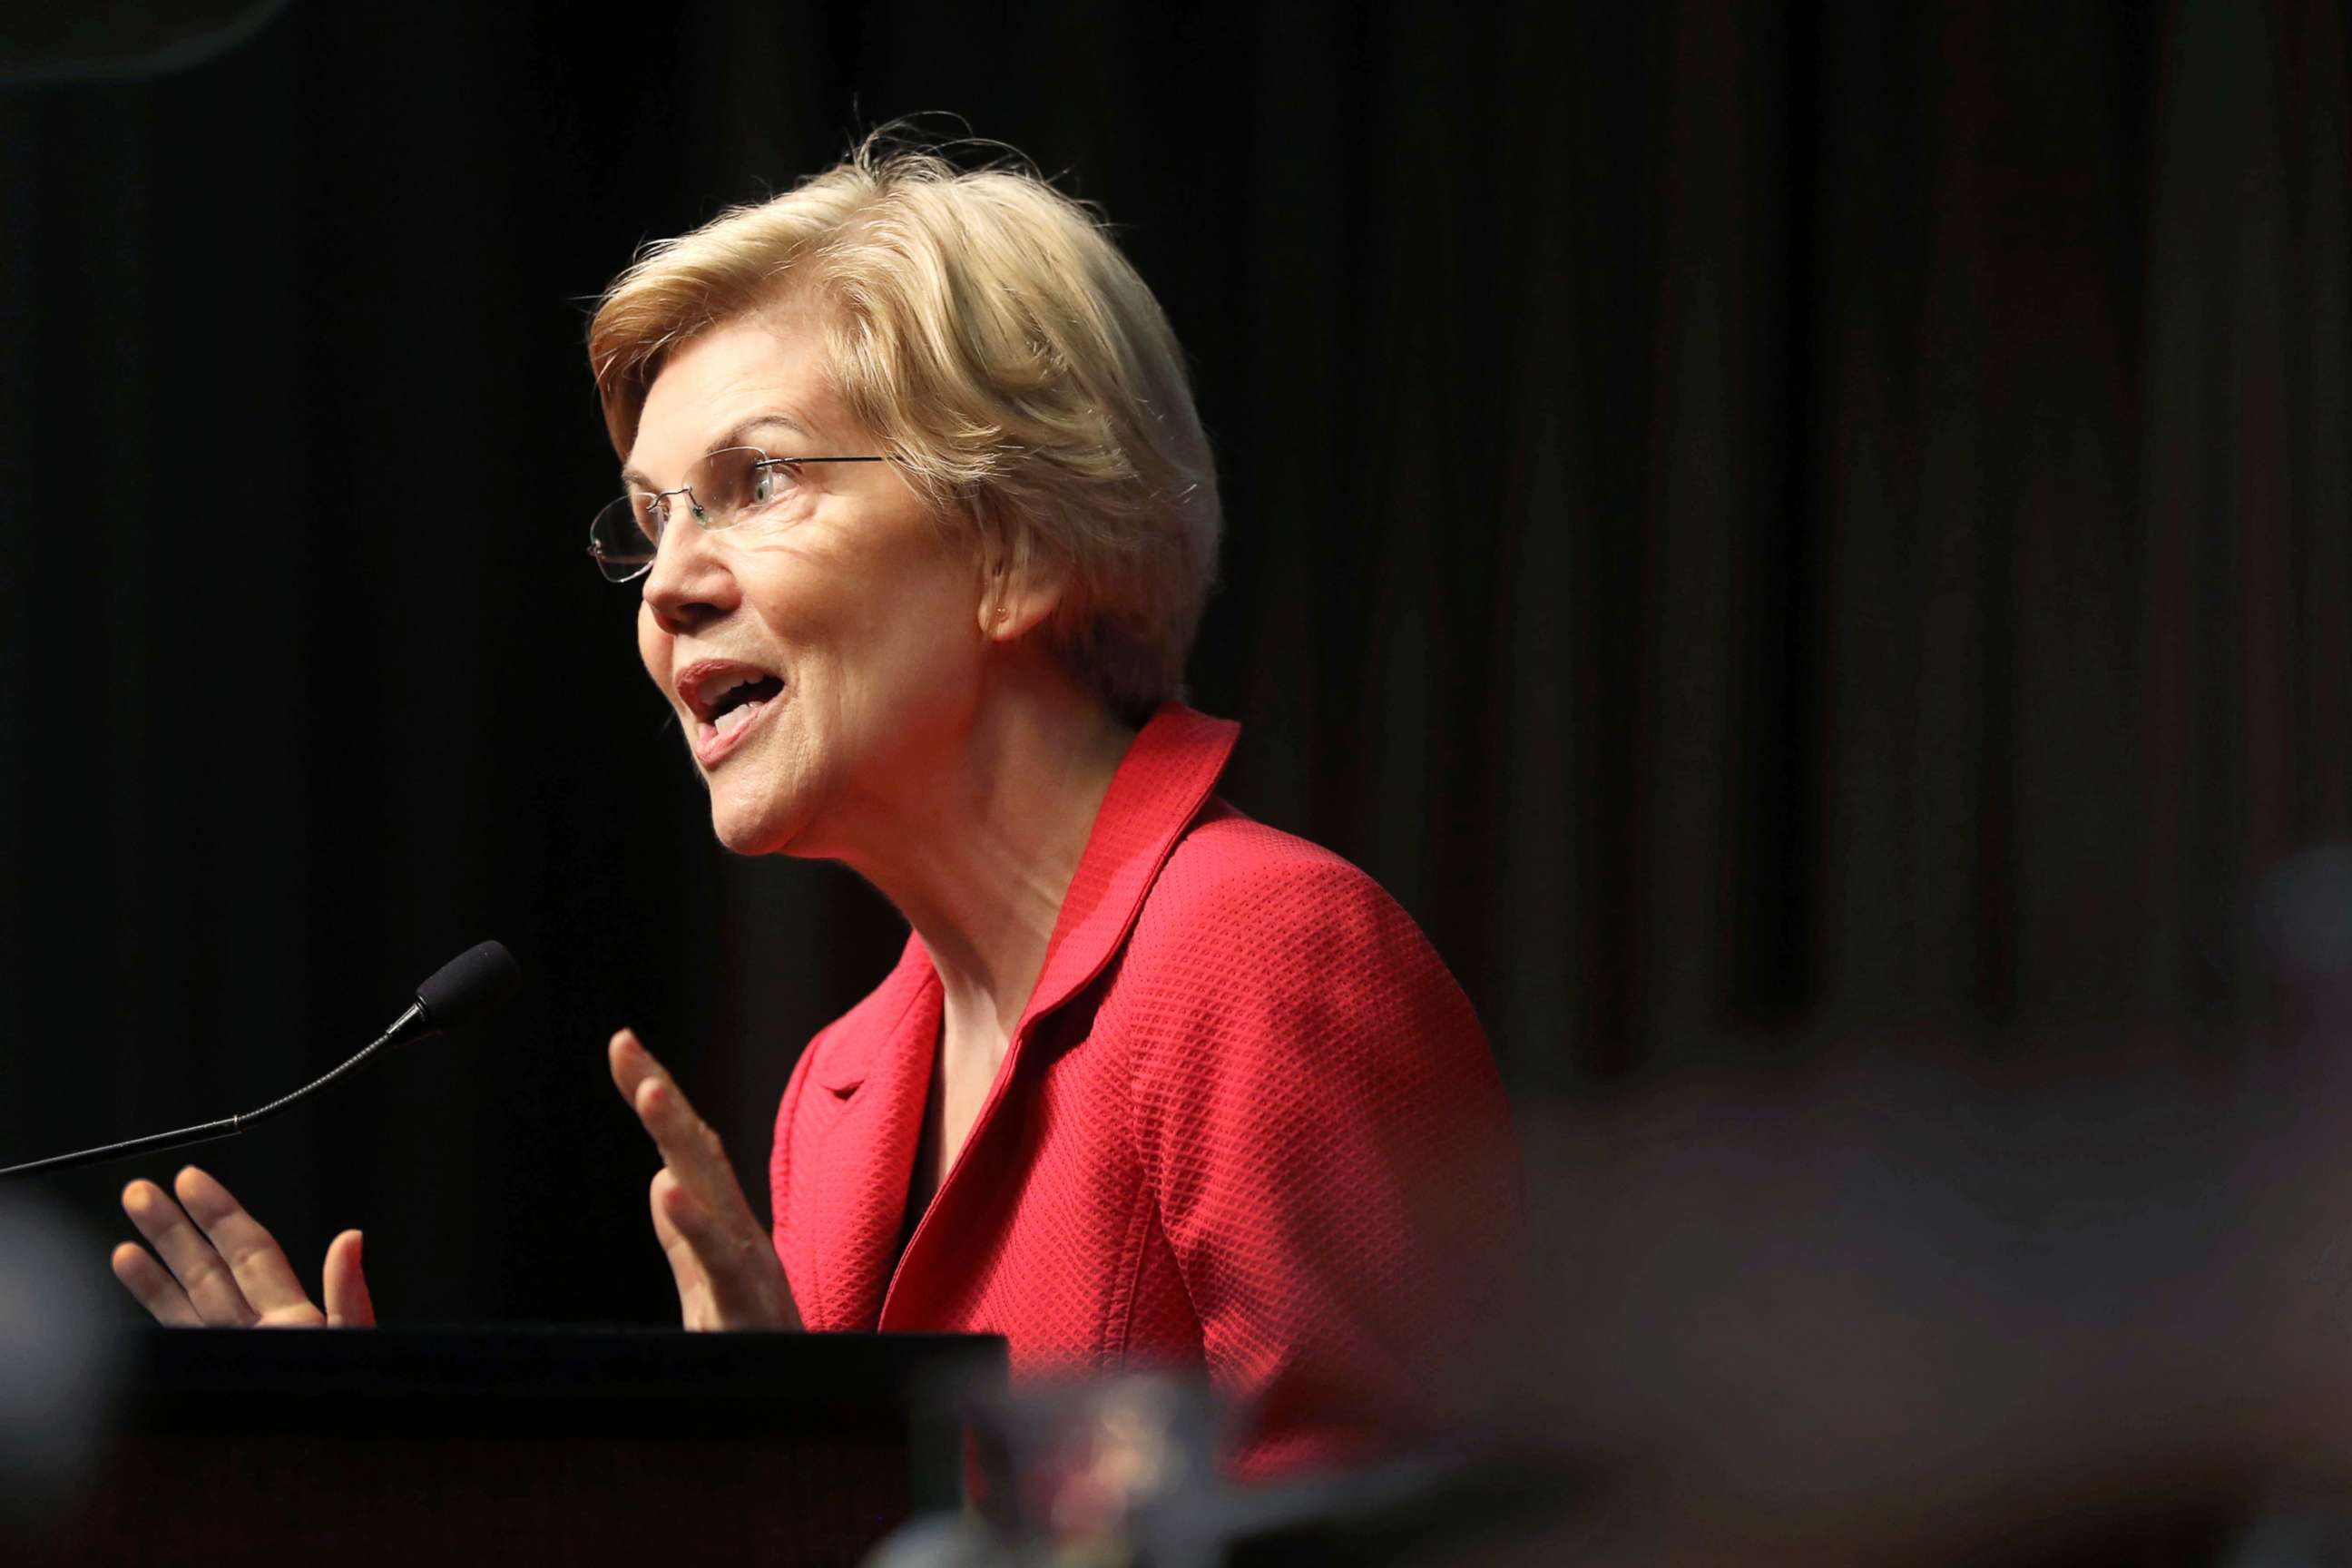 PHOTO: Democratic presidential candidate U.S. Sen. Elizabeth Warren speaks at the National Action Network's annual convention on April 5, 2019 in New York City.